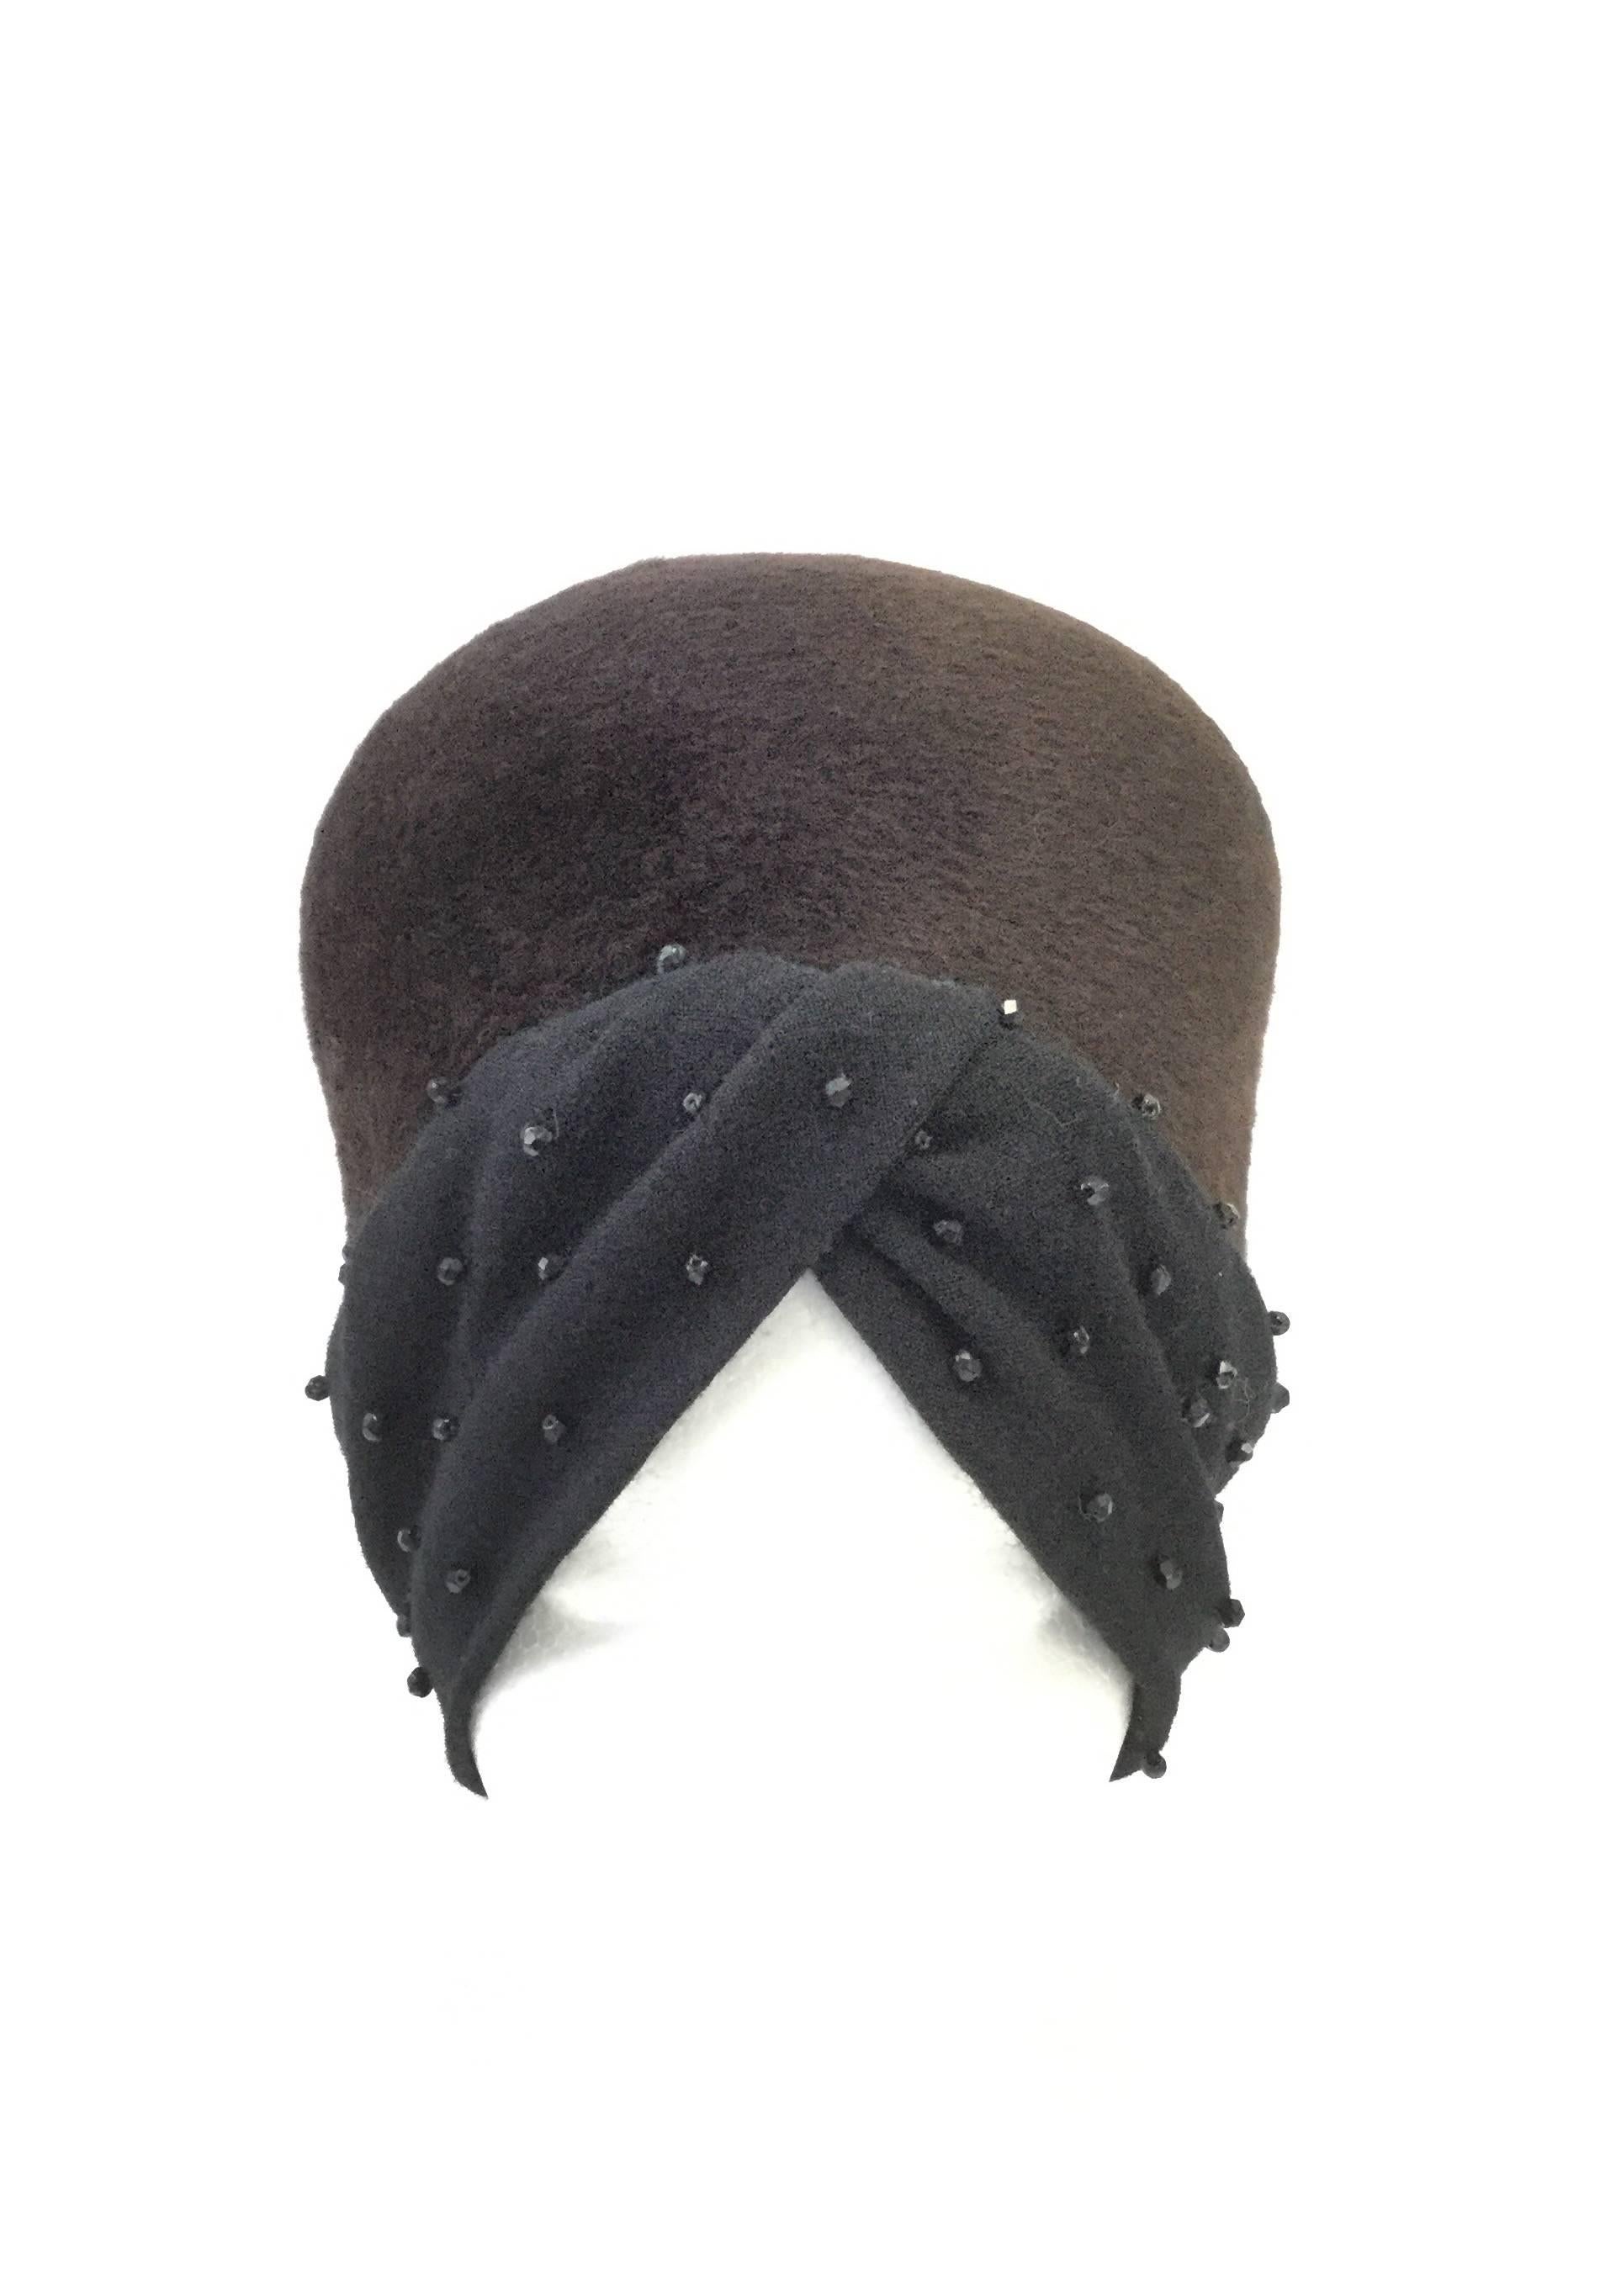 
Elegant and fun hat by Helios! This brown felt hat has a tall, rounded crown with a black beaded turban wrap base. The turban folds left over right and features medium-sized multifaceted black beads, adding a fun little sparkle to the elegant hat.